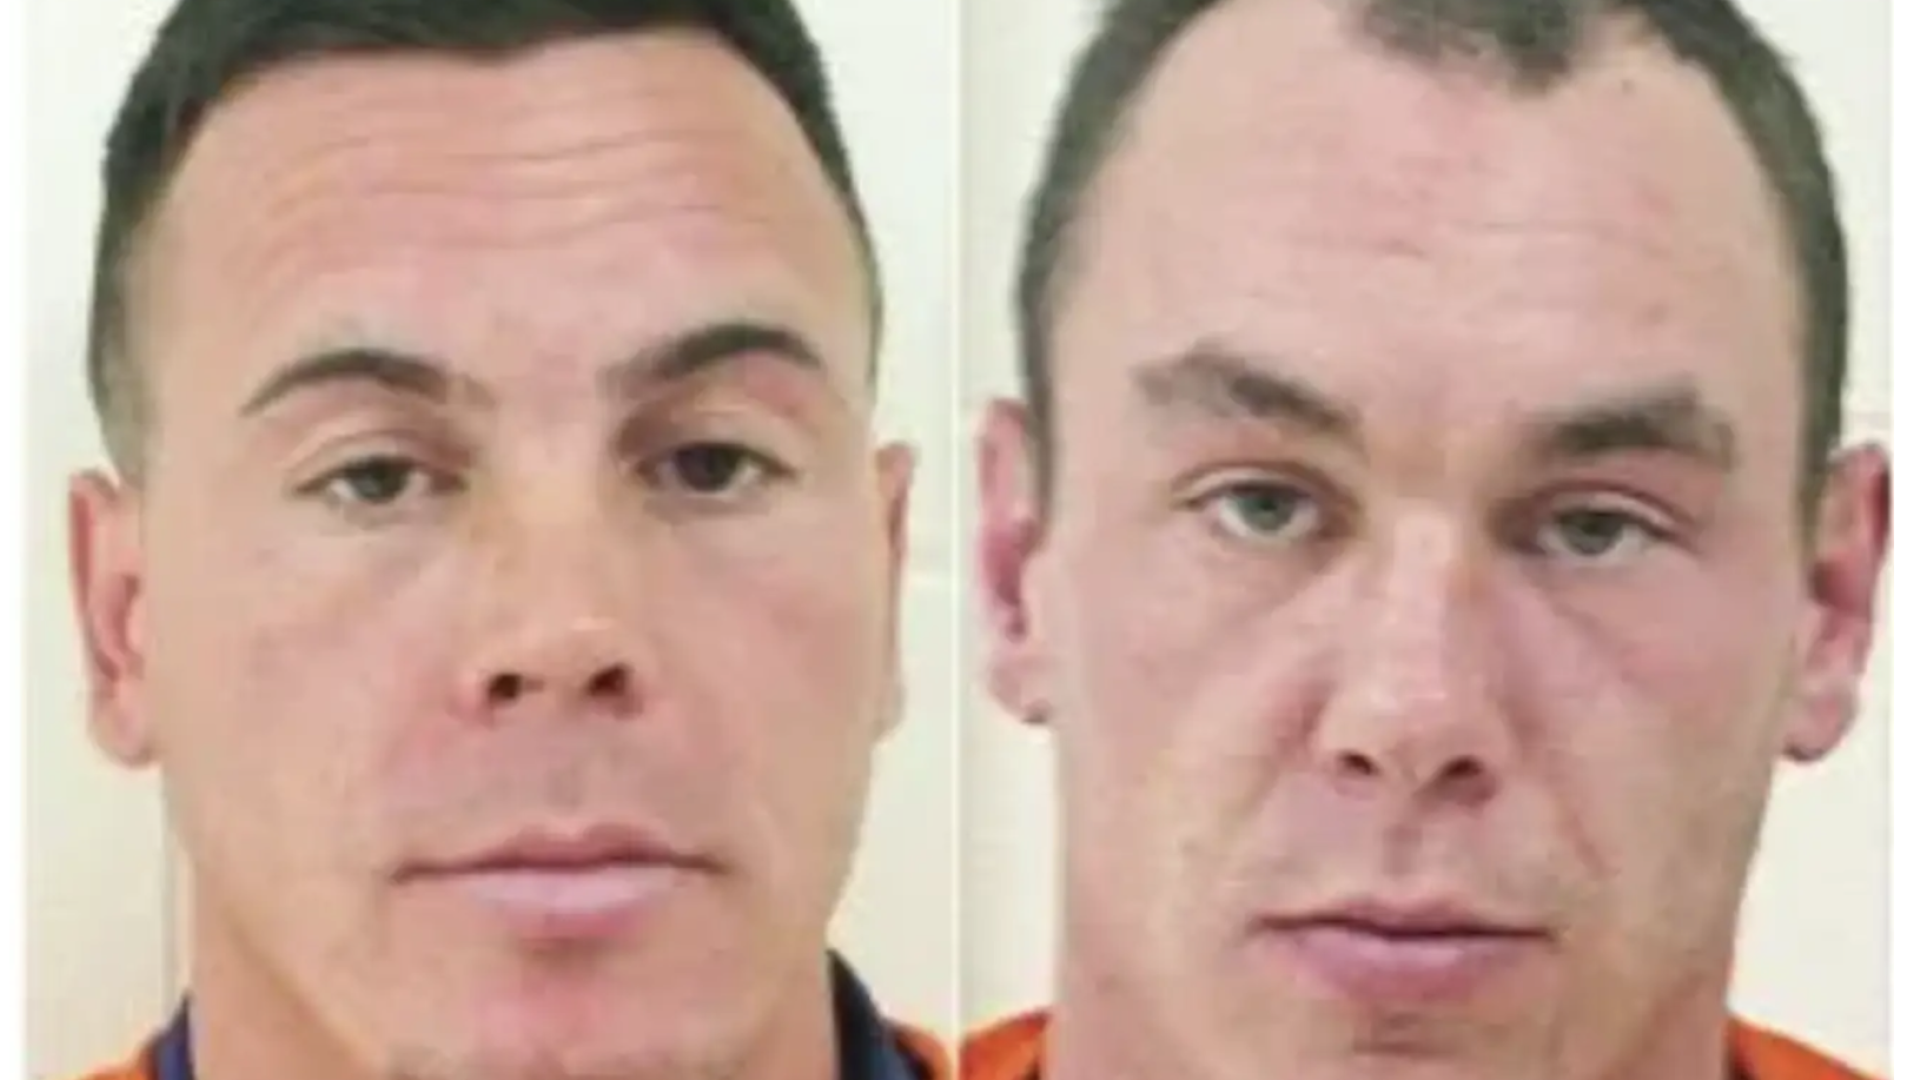 Two White Men Must Pay $1.25 Million For Racially Motivated Attack Against Black Man In Maine